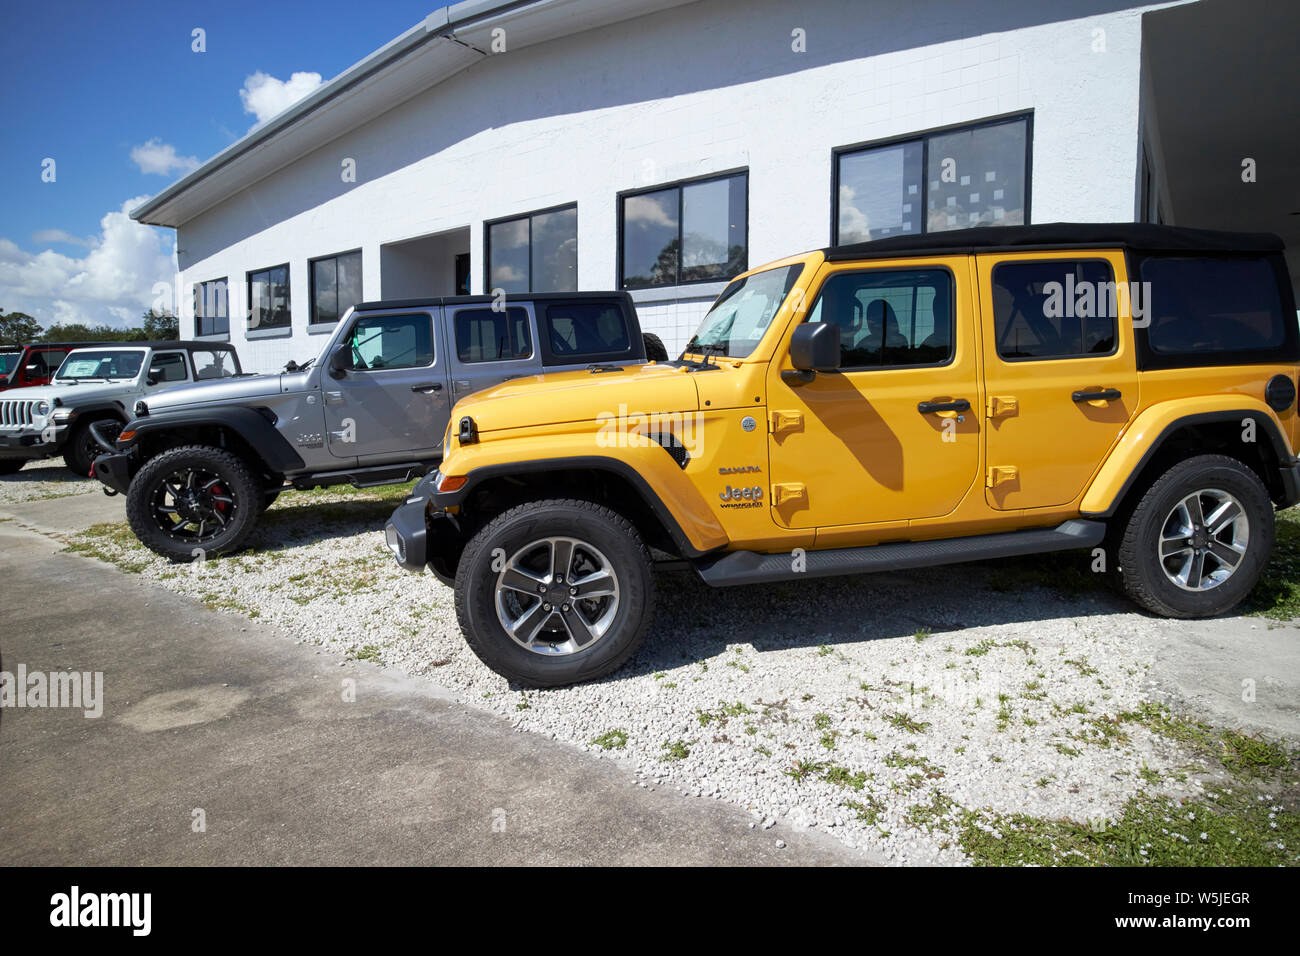 new jeep wrangler suvs for sale vehicles on a car sales lot in florida usa united states of america Stock Photo